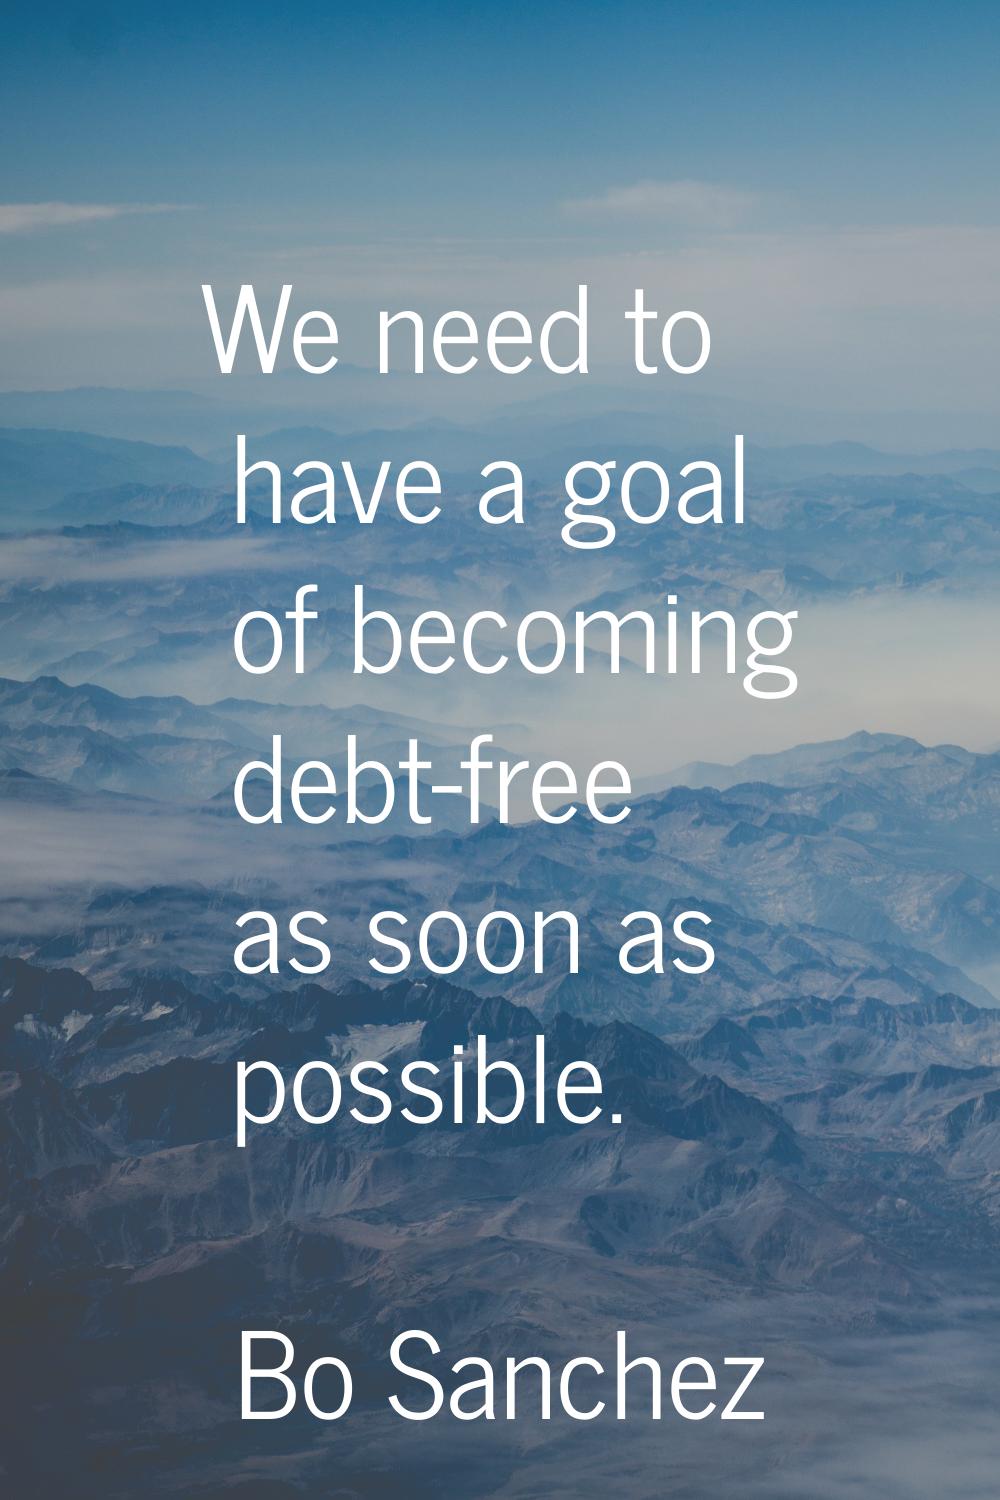 We need to have a goal of becoming debt-free as soon as possible.